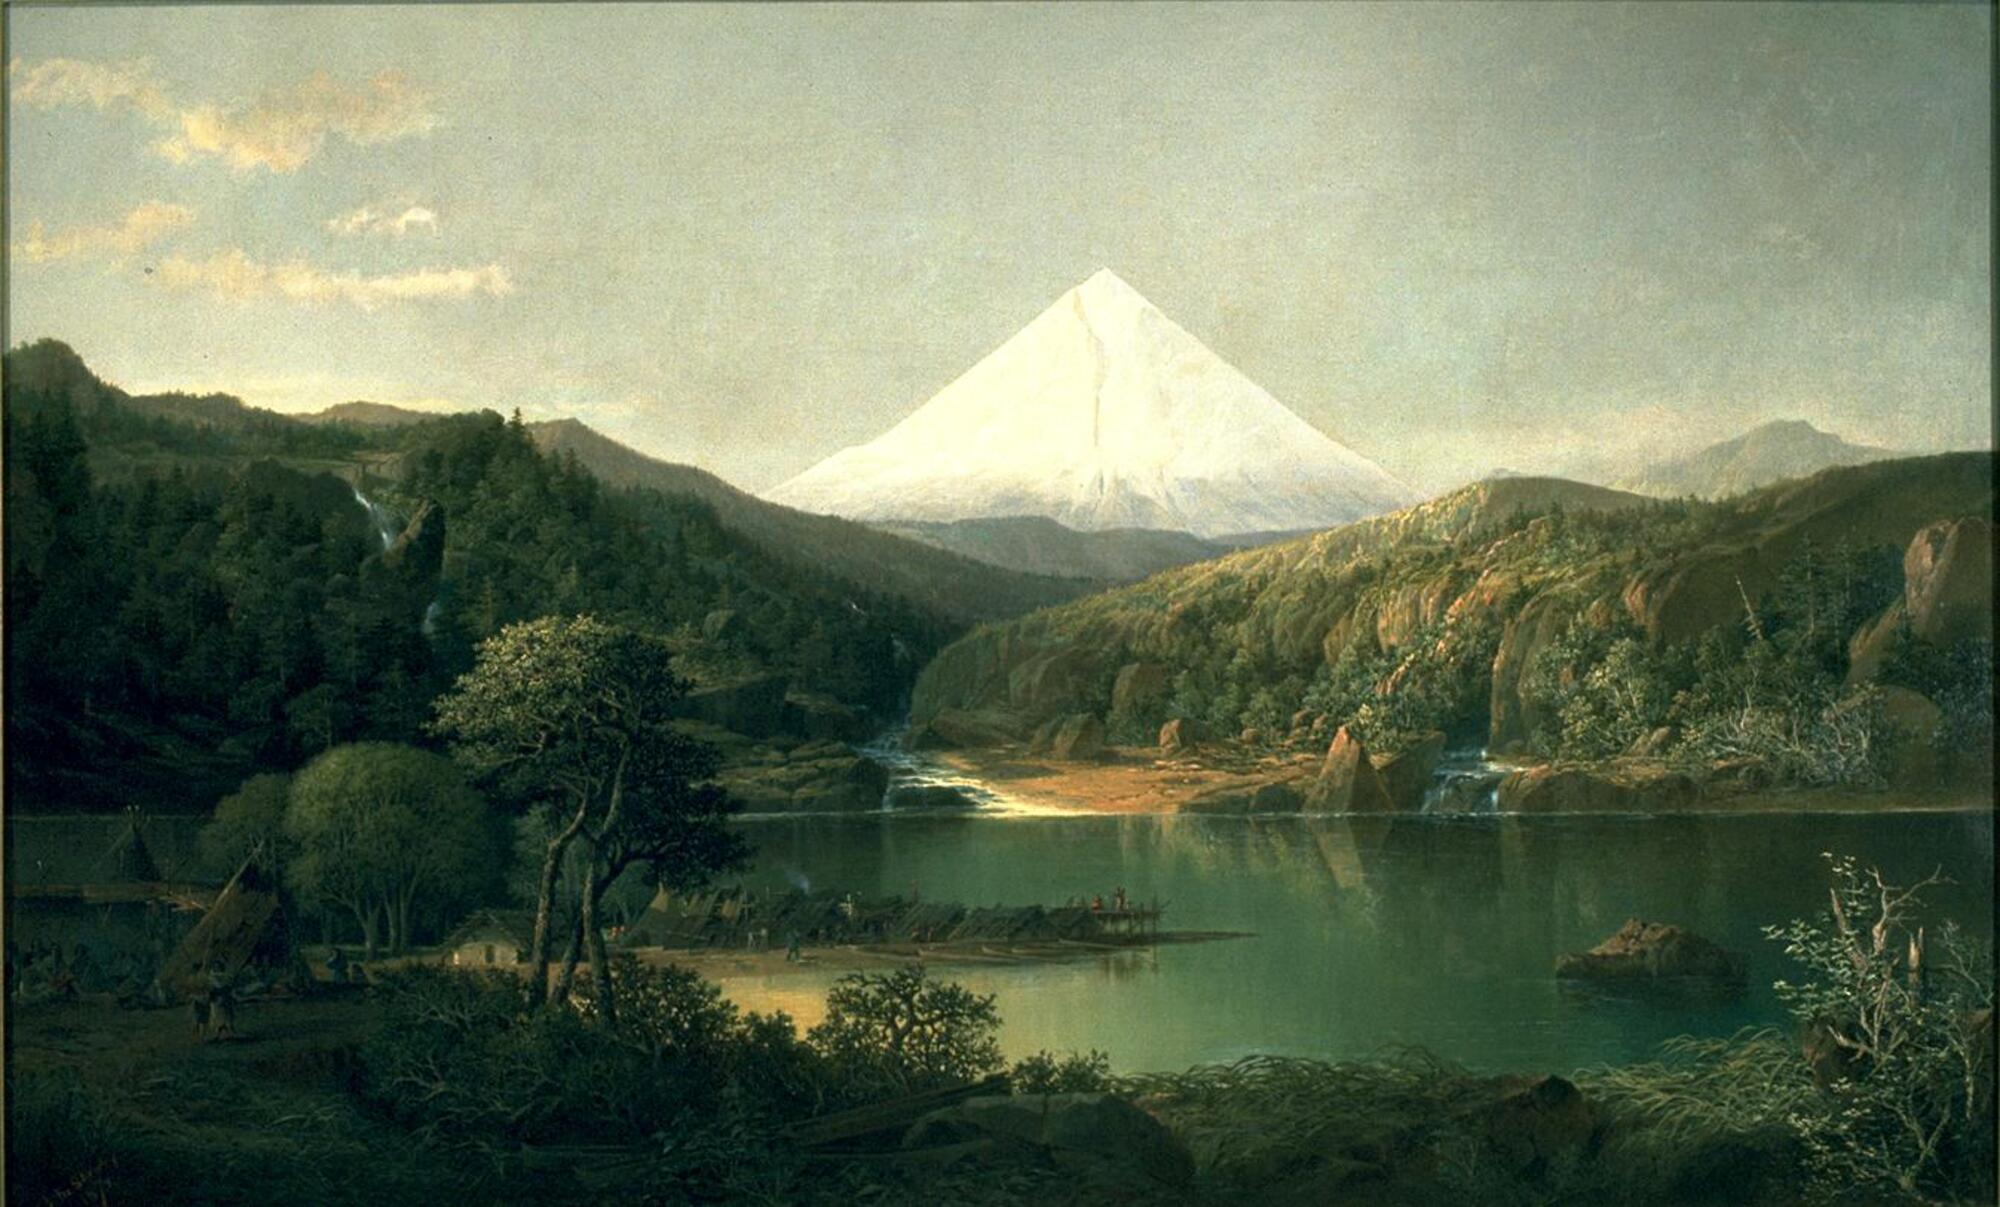 Landscape painting with white mountain peak in center background, body of water in foreground, and a Native American encampment to left.